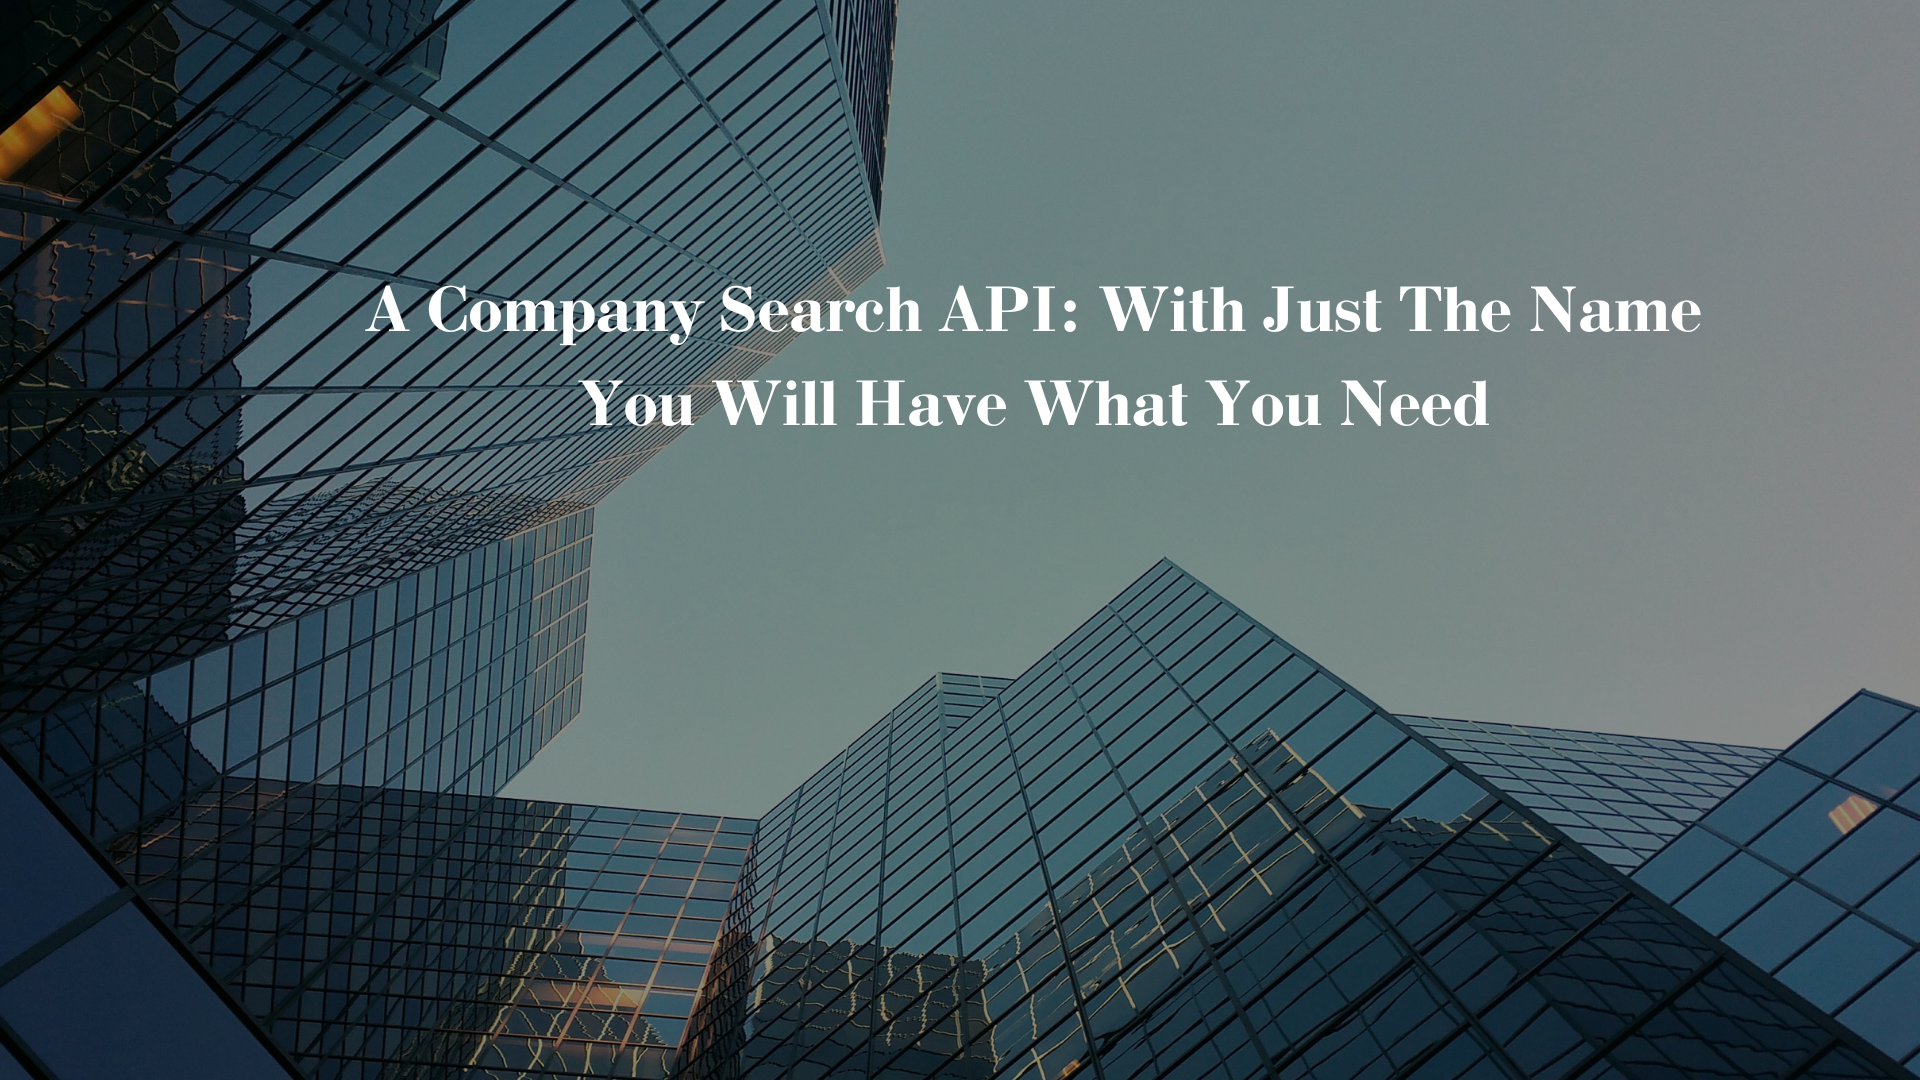 A Company Search API: With Just The Name You Will Have What You Need